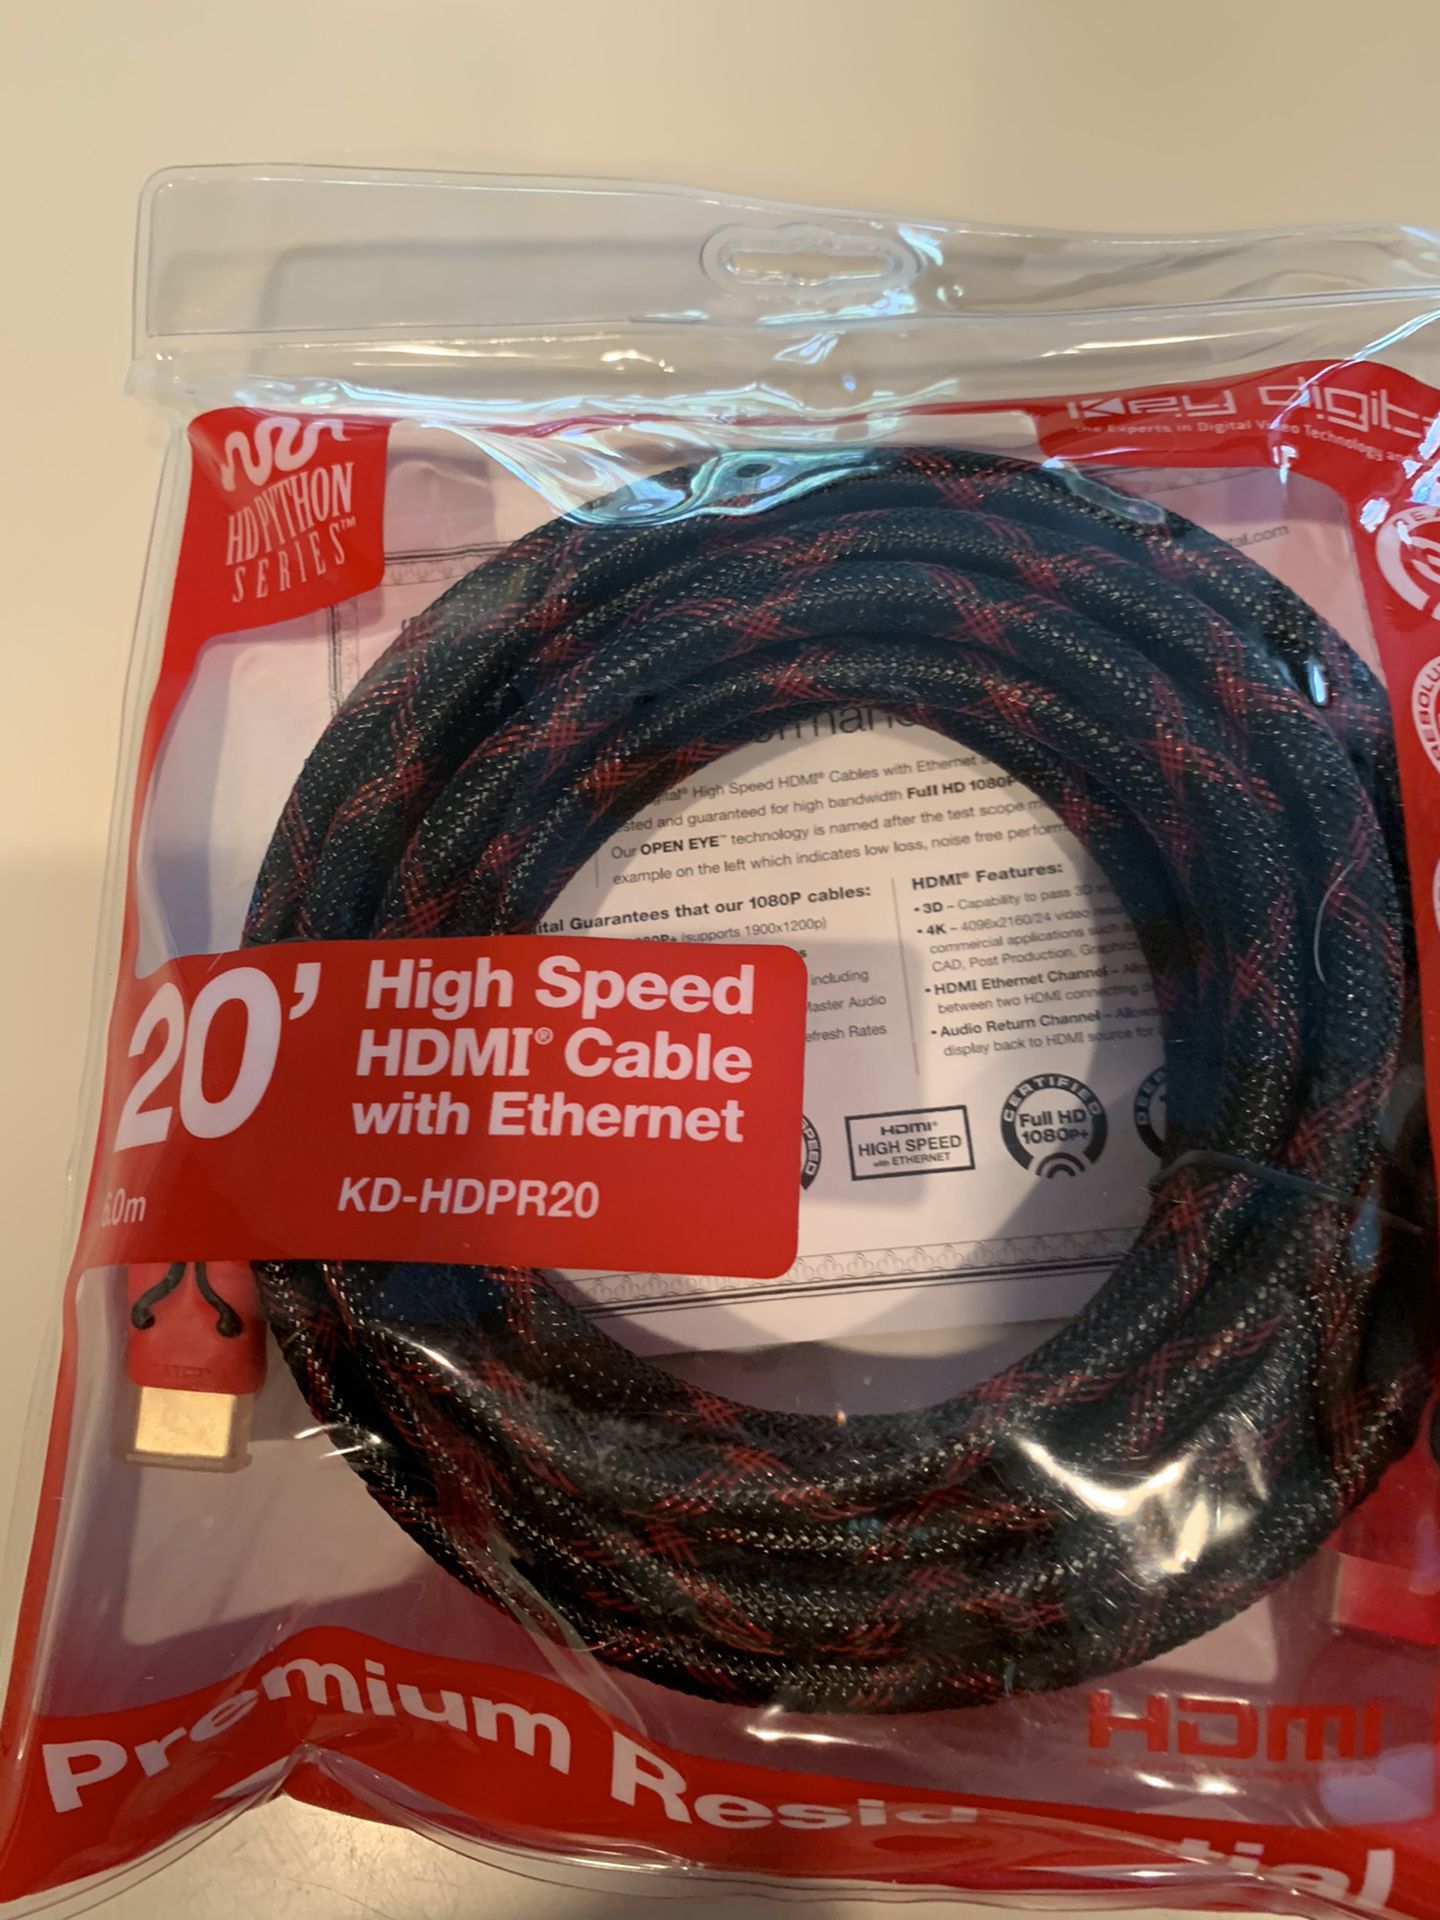 Key Digital Python Series 20ft High Speed HDMI Cable with Ethernet KD-HDPR20 new in package